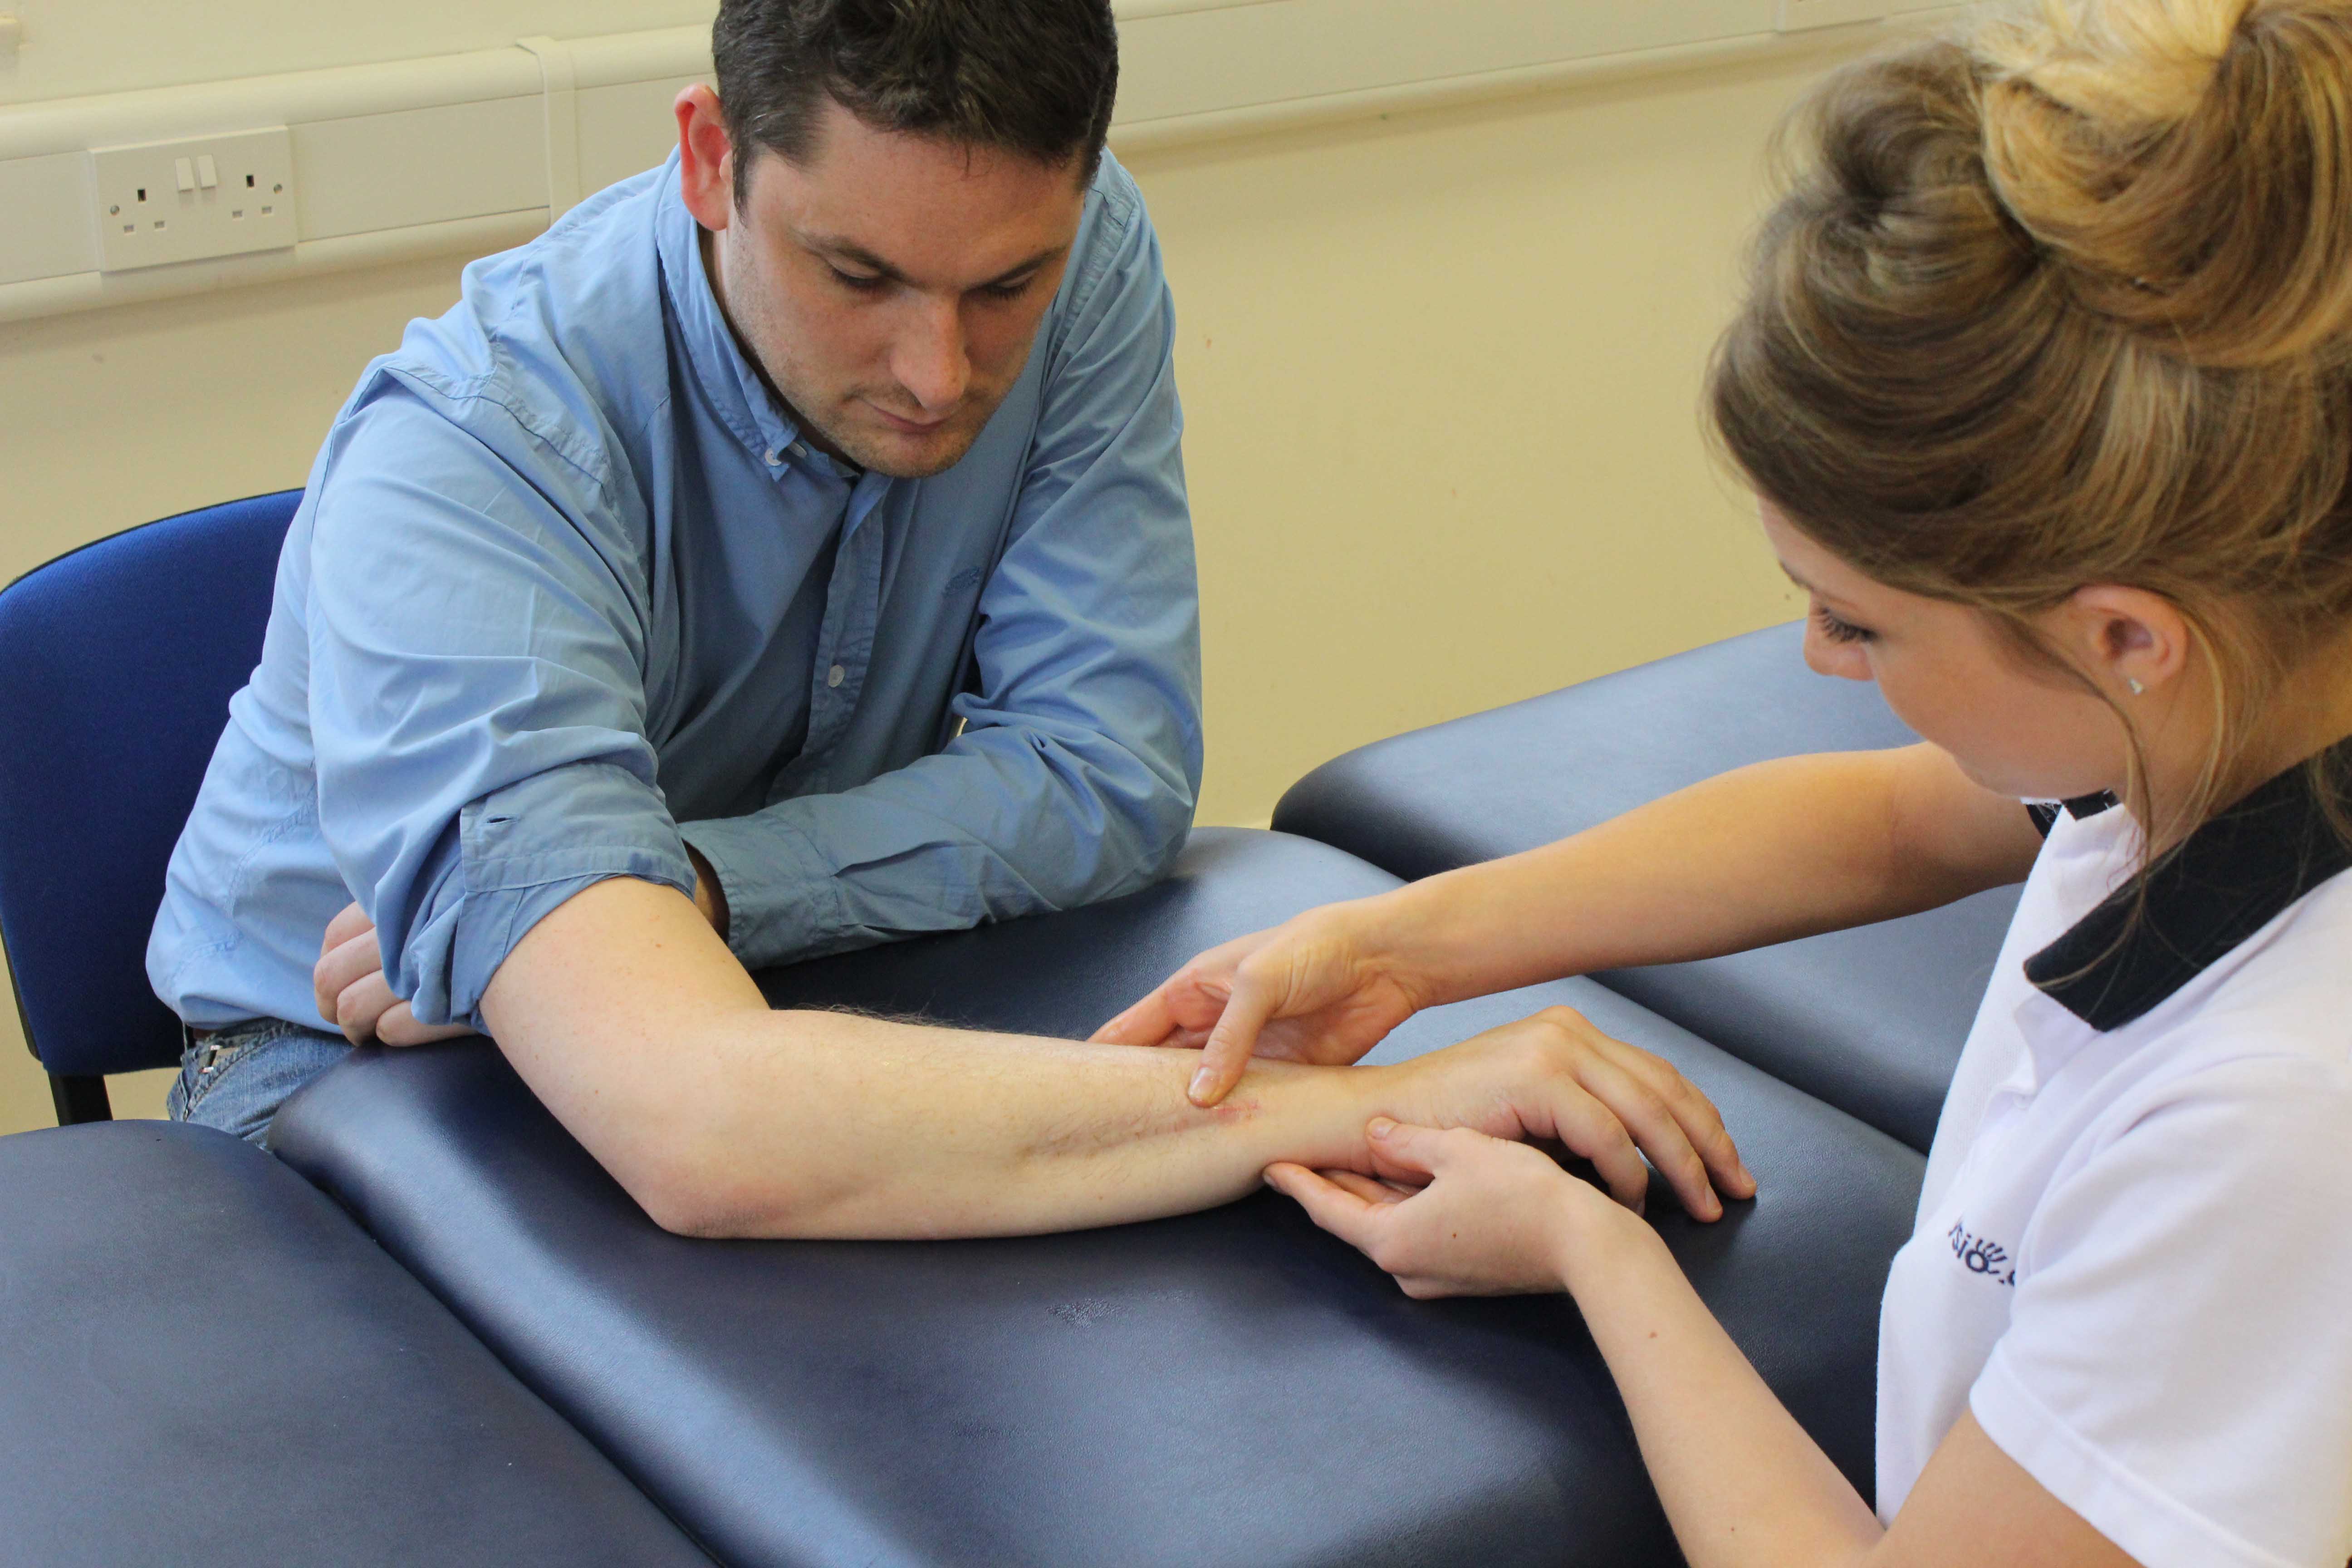 Therapist examination of wrist healing following a fracture